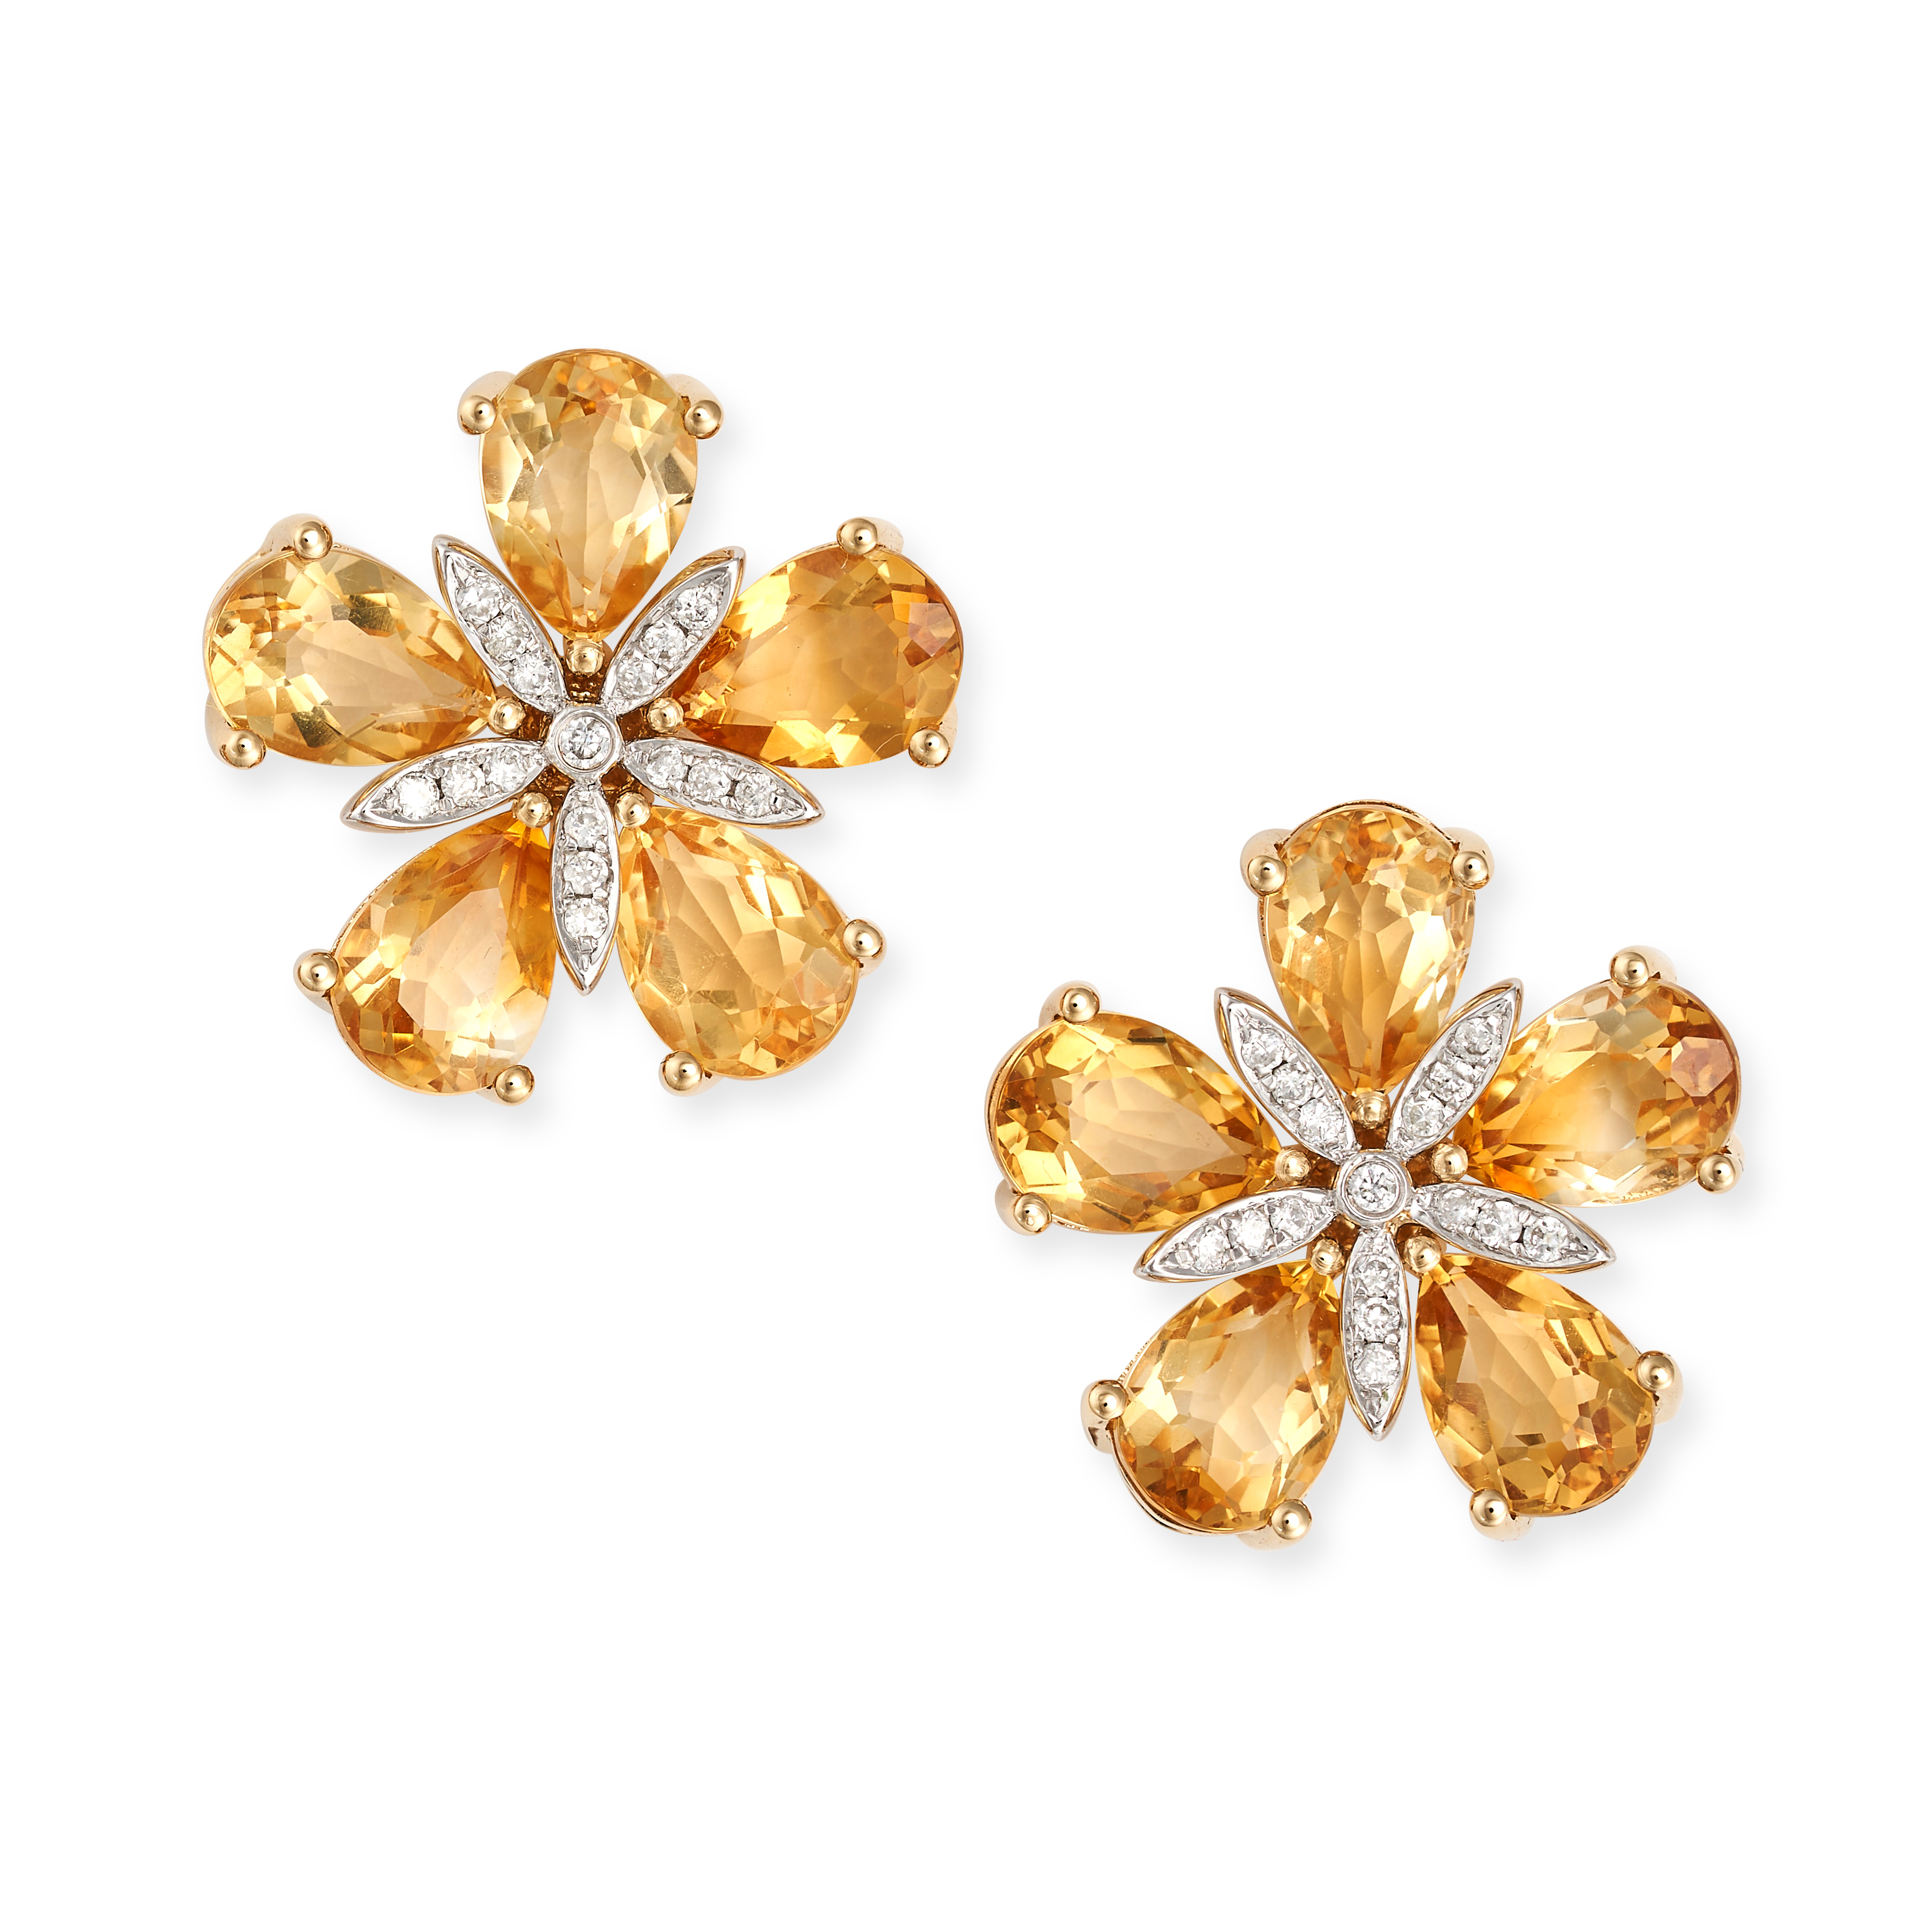 A PAIR OF CITRINE AND DIAMOND FLOWER EARRINGS in 18ct yellow and white gold, each designed as a f...